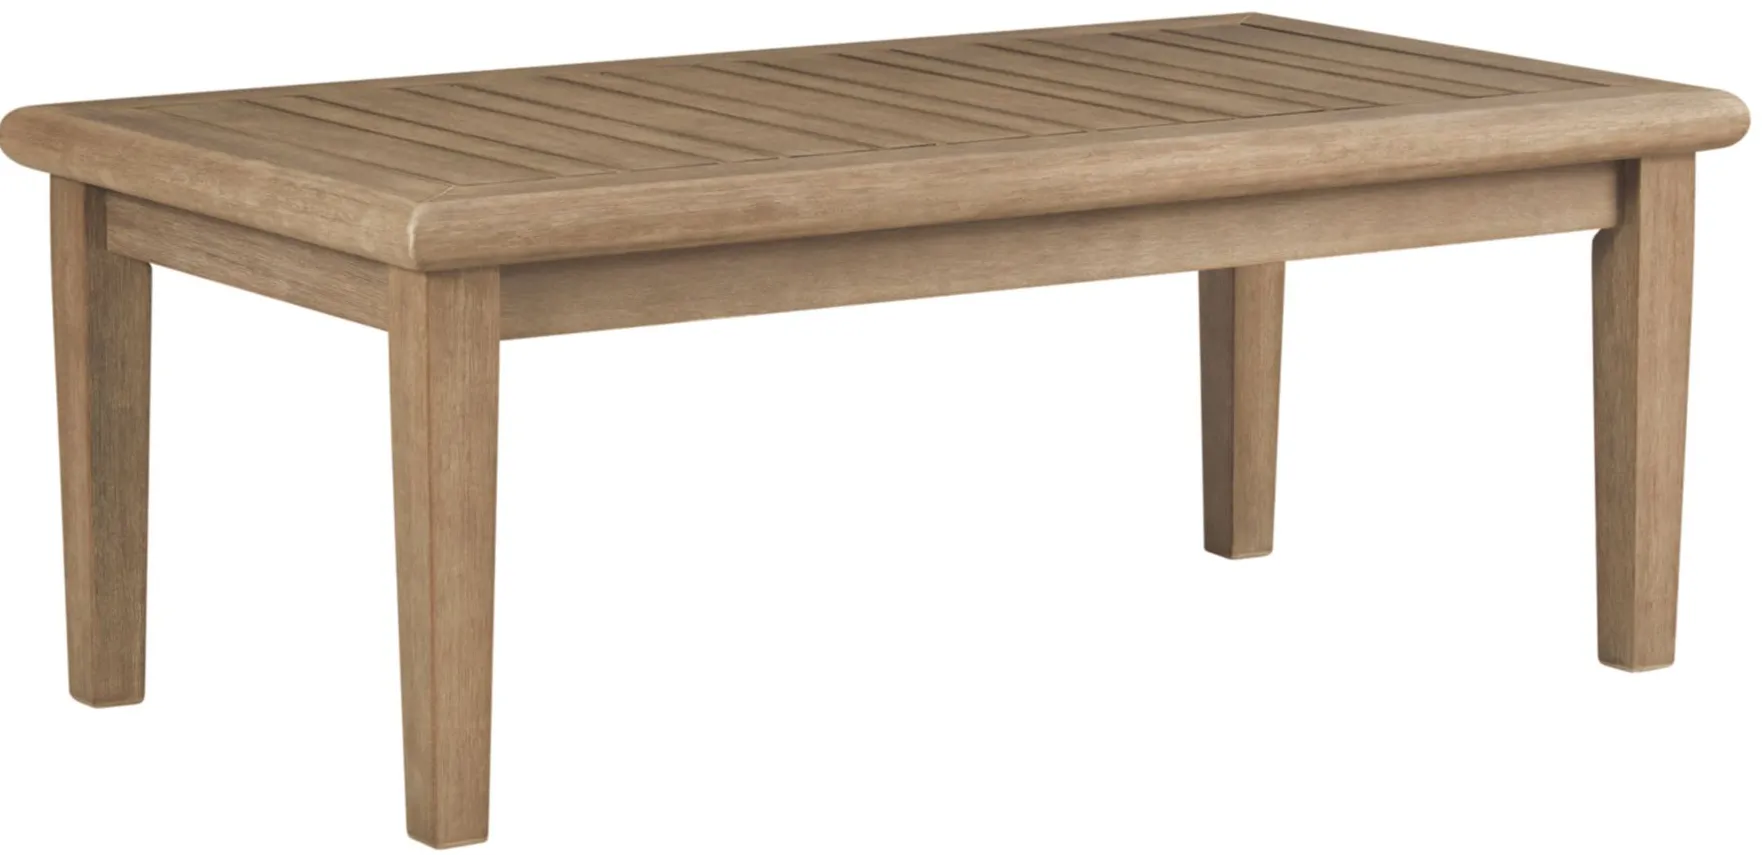 Gerianne Outdoor Cocktail Table in Grayish Brown by Ashley Furniture